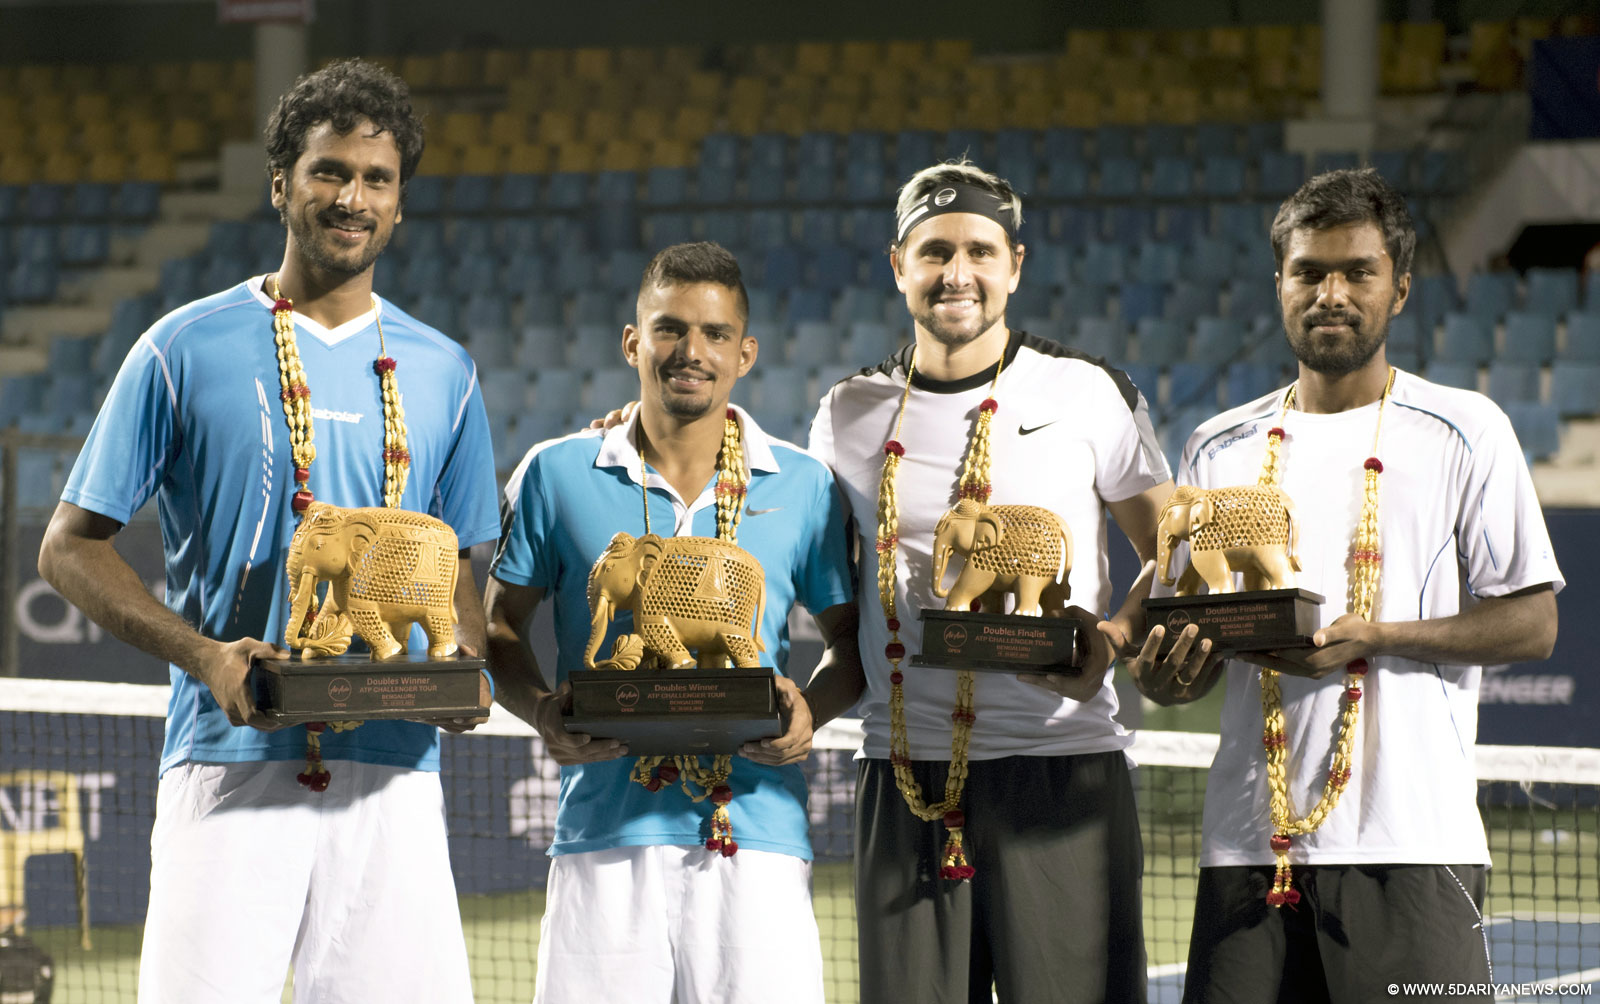 Doubles winner India`s Saketh Myneni and Sanam Singh with runners-up India`s Vijay Sundar Prashanth and USA`s John Paul Fruttero during the prize distribution ceremony of ATP Challenger Tour at KSLTA, in Bengaluru, on Oct 24, 2015.